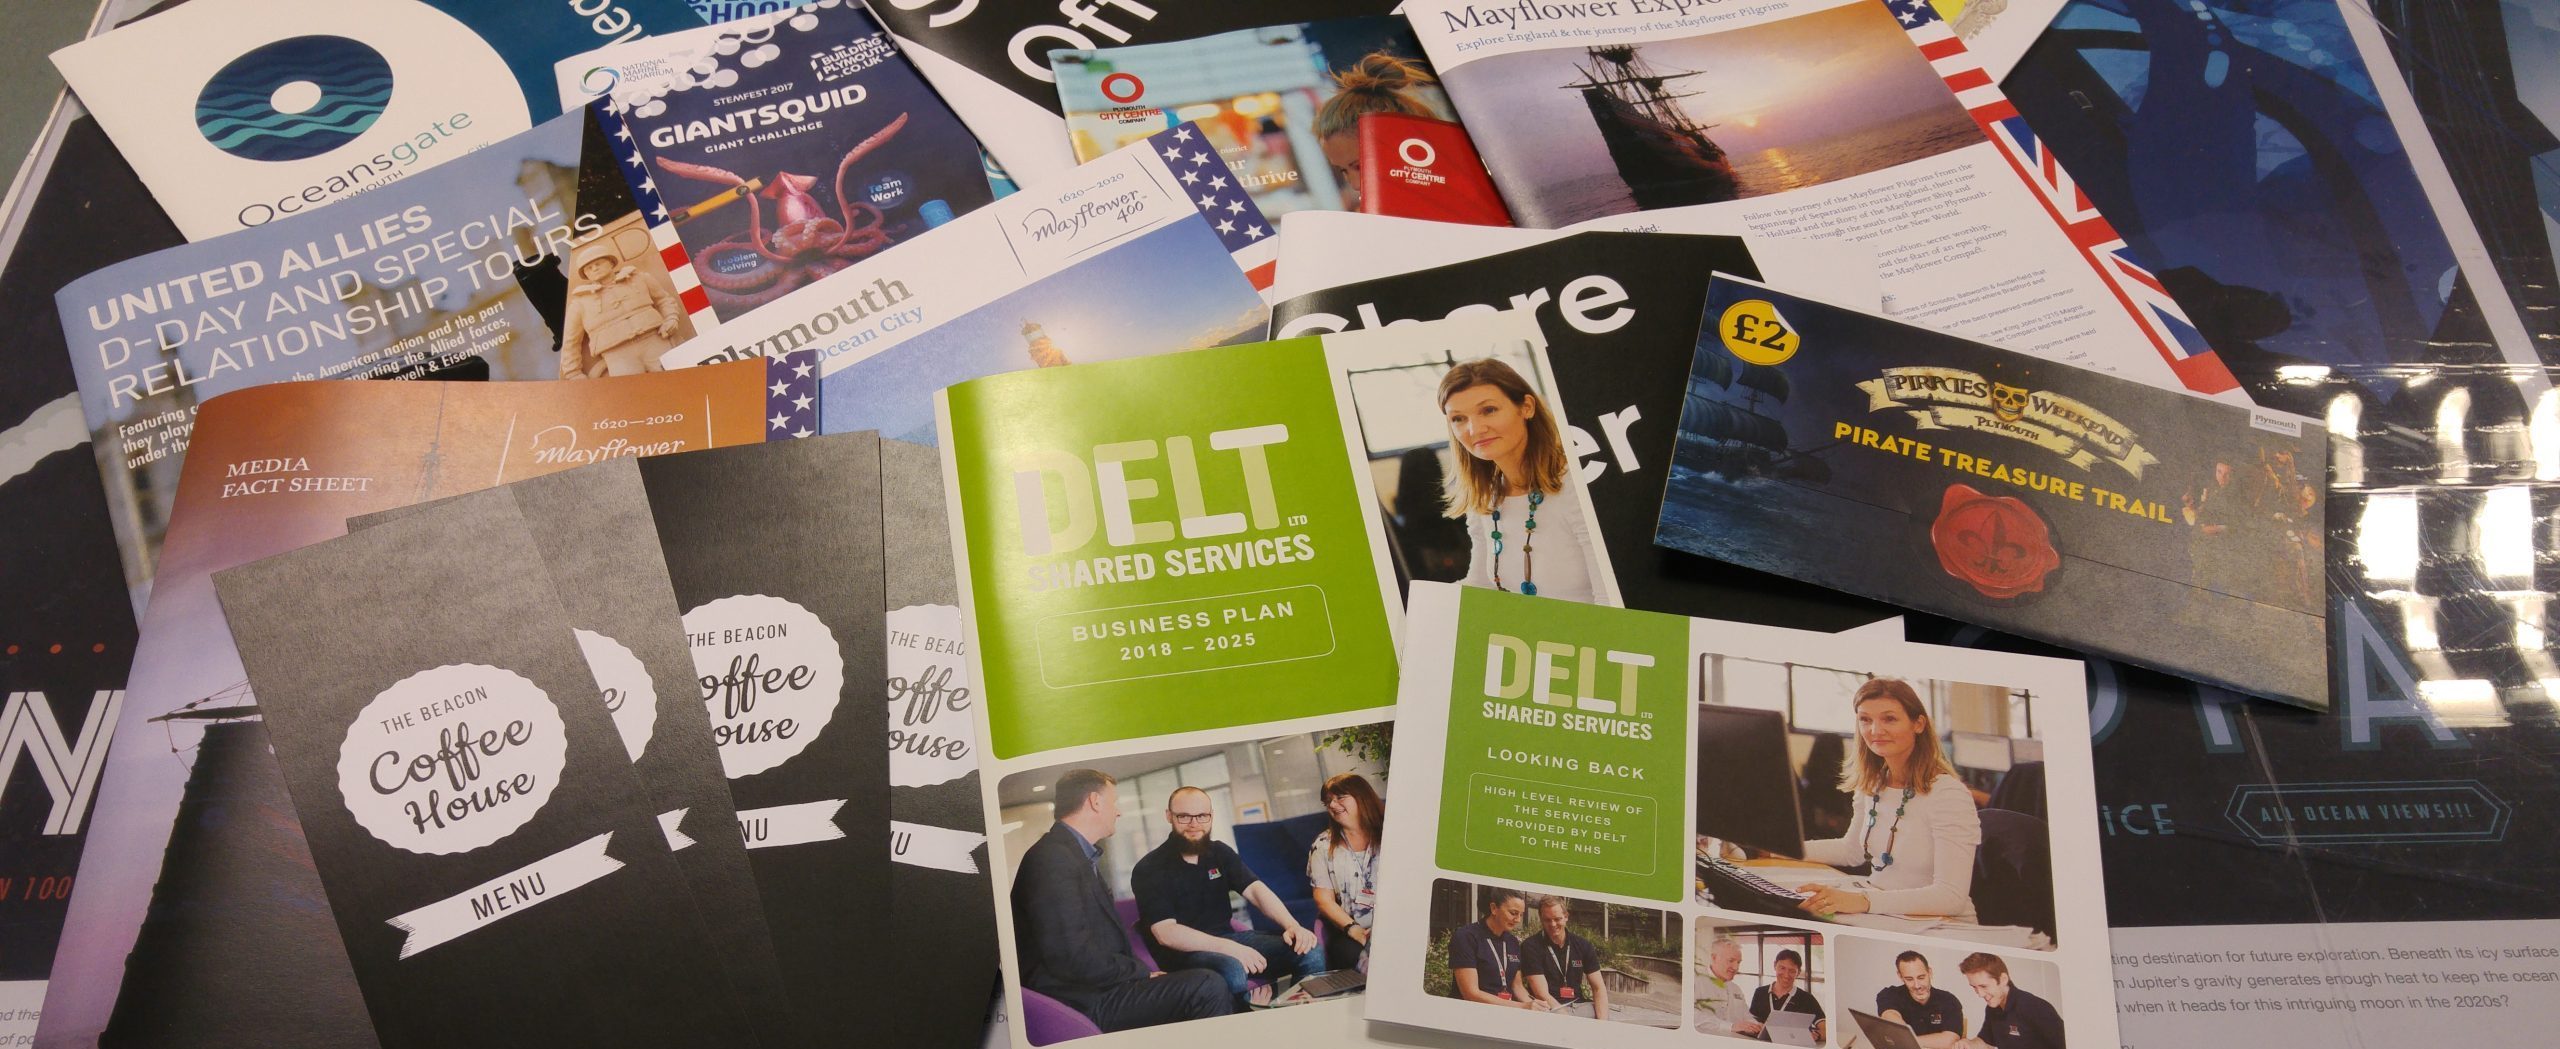 Delt Shared Services Print and Mail Header Image